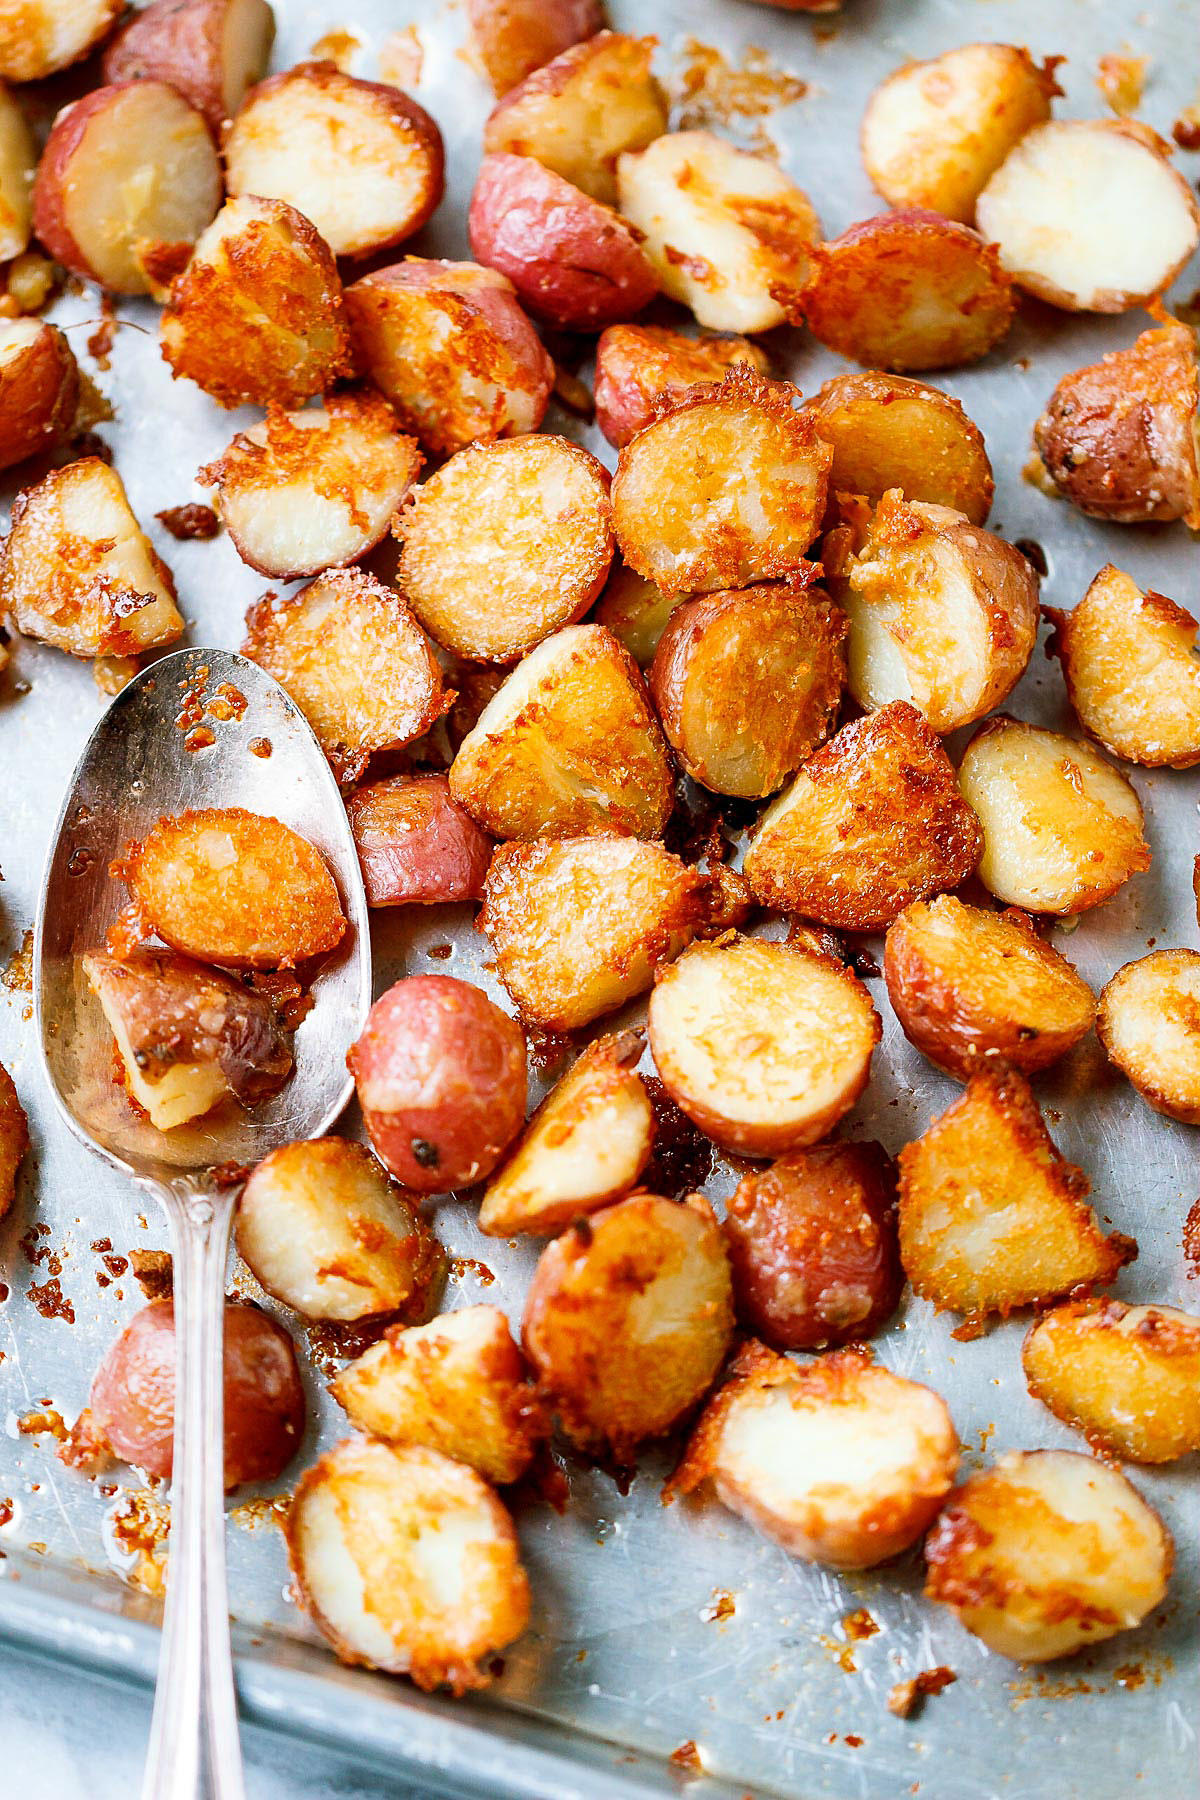 Roasted Garlic Butter Parmesan Potatoes - #eatwell101 #recipe #poatoes #sidedish - These epic roasted potatoes with garlic butter parmesan are perfect side for your meal! - #recipe by #eatwell101